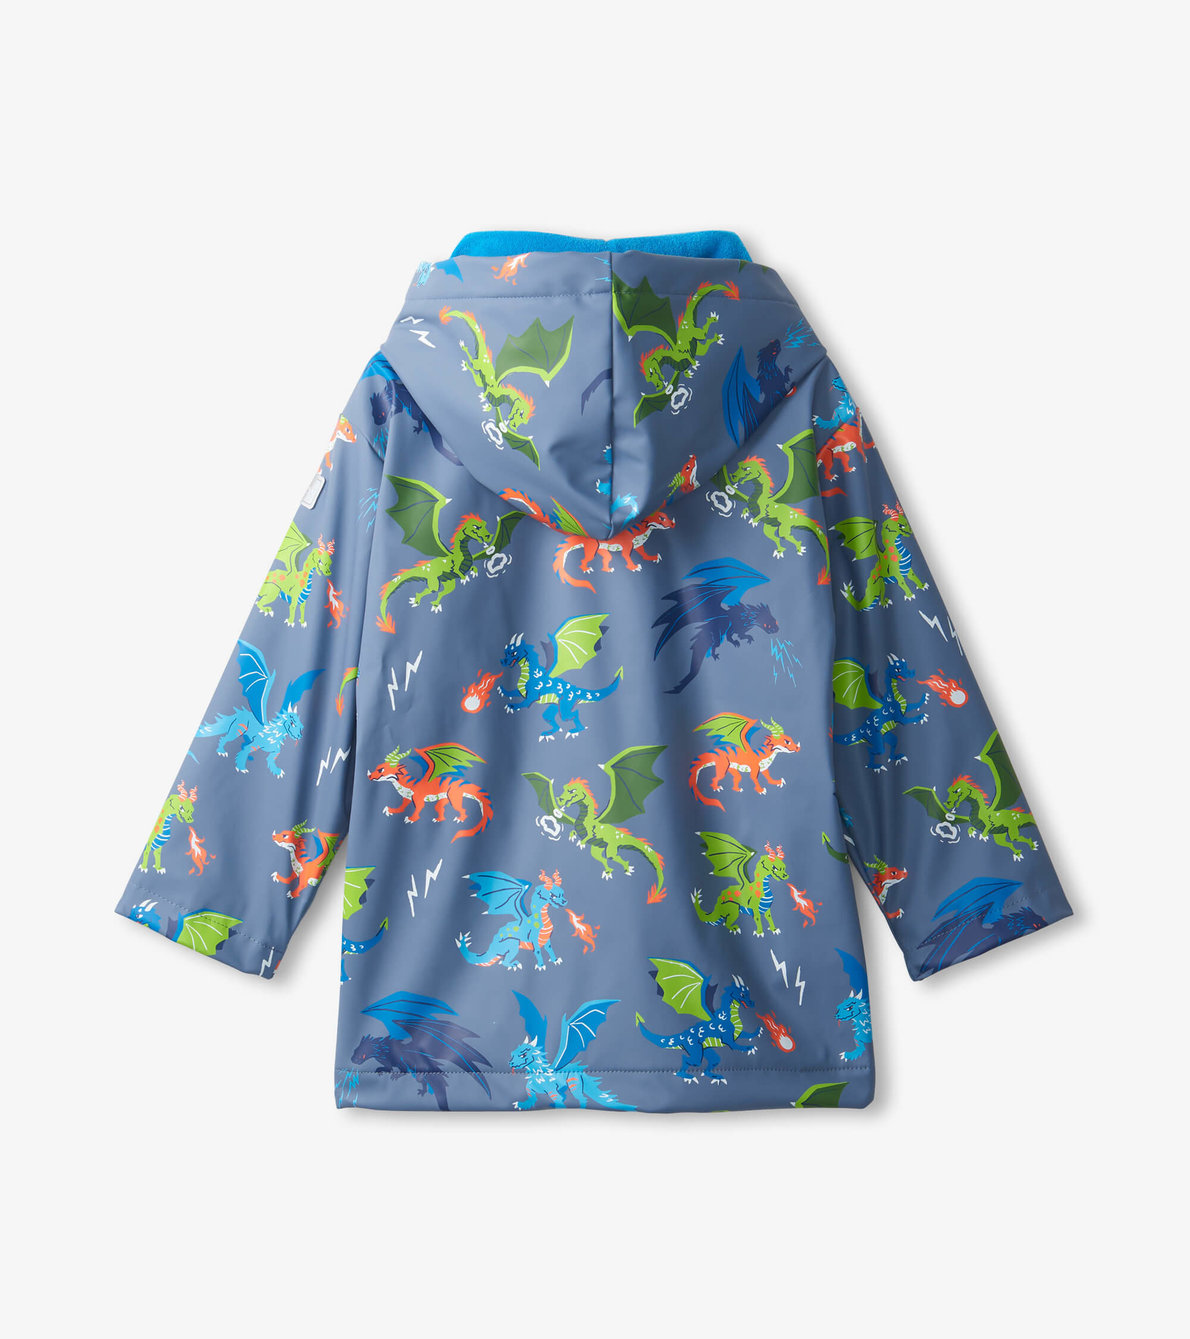 View larger image of Dragon Realm Kids Raincoat